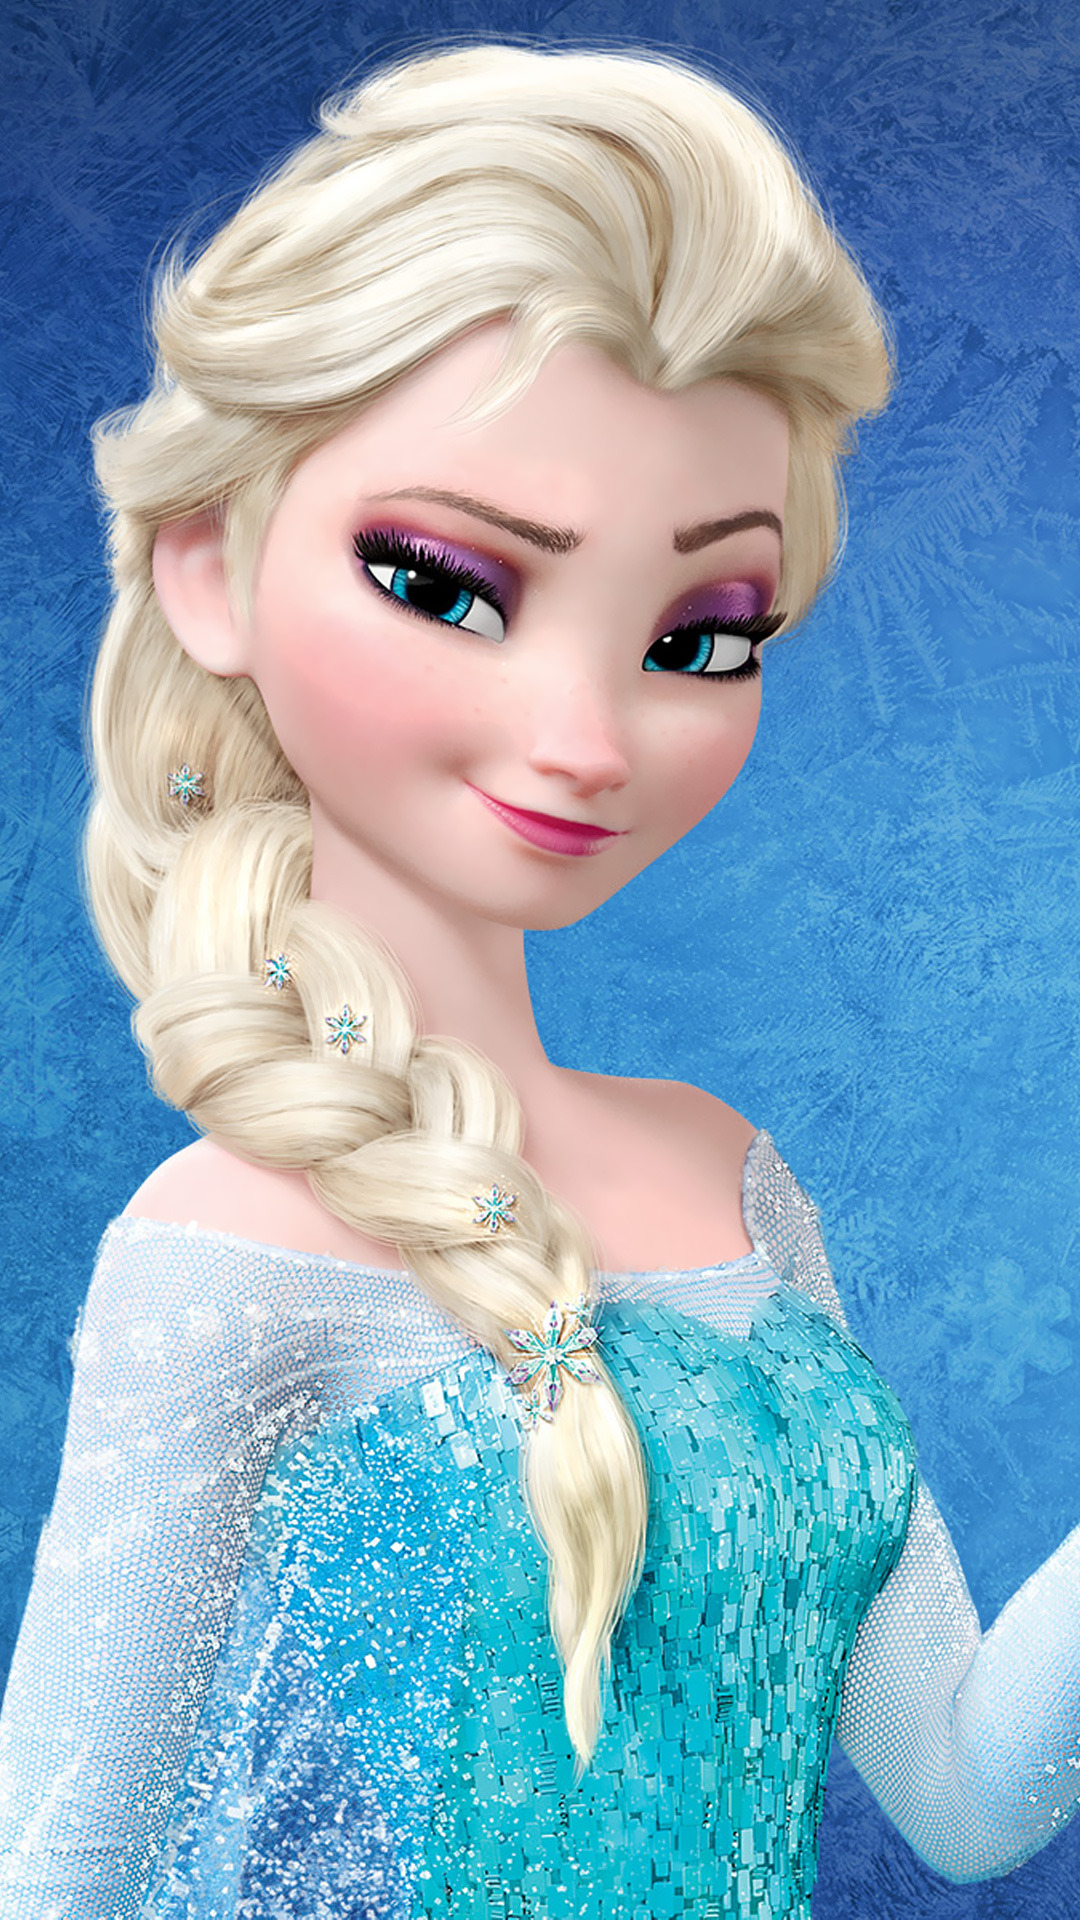 Frozen Elsa   Best htc one wallpapers free and easy to download